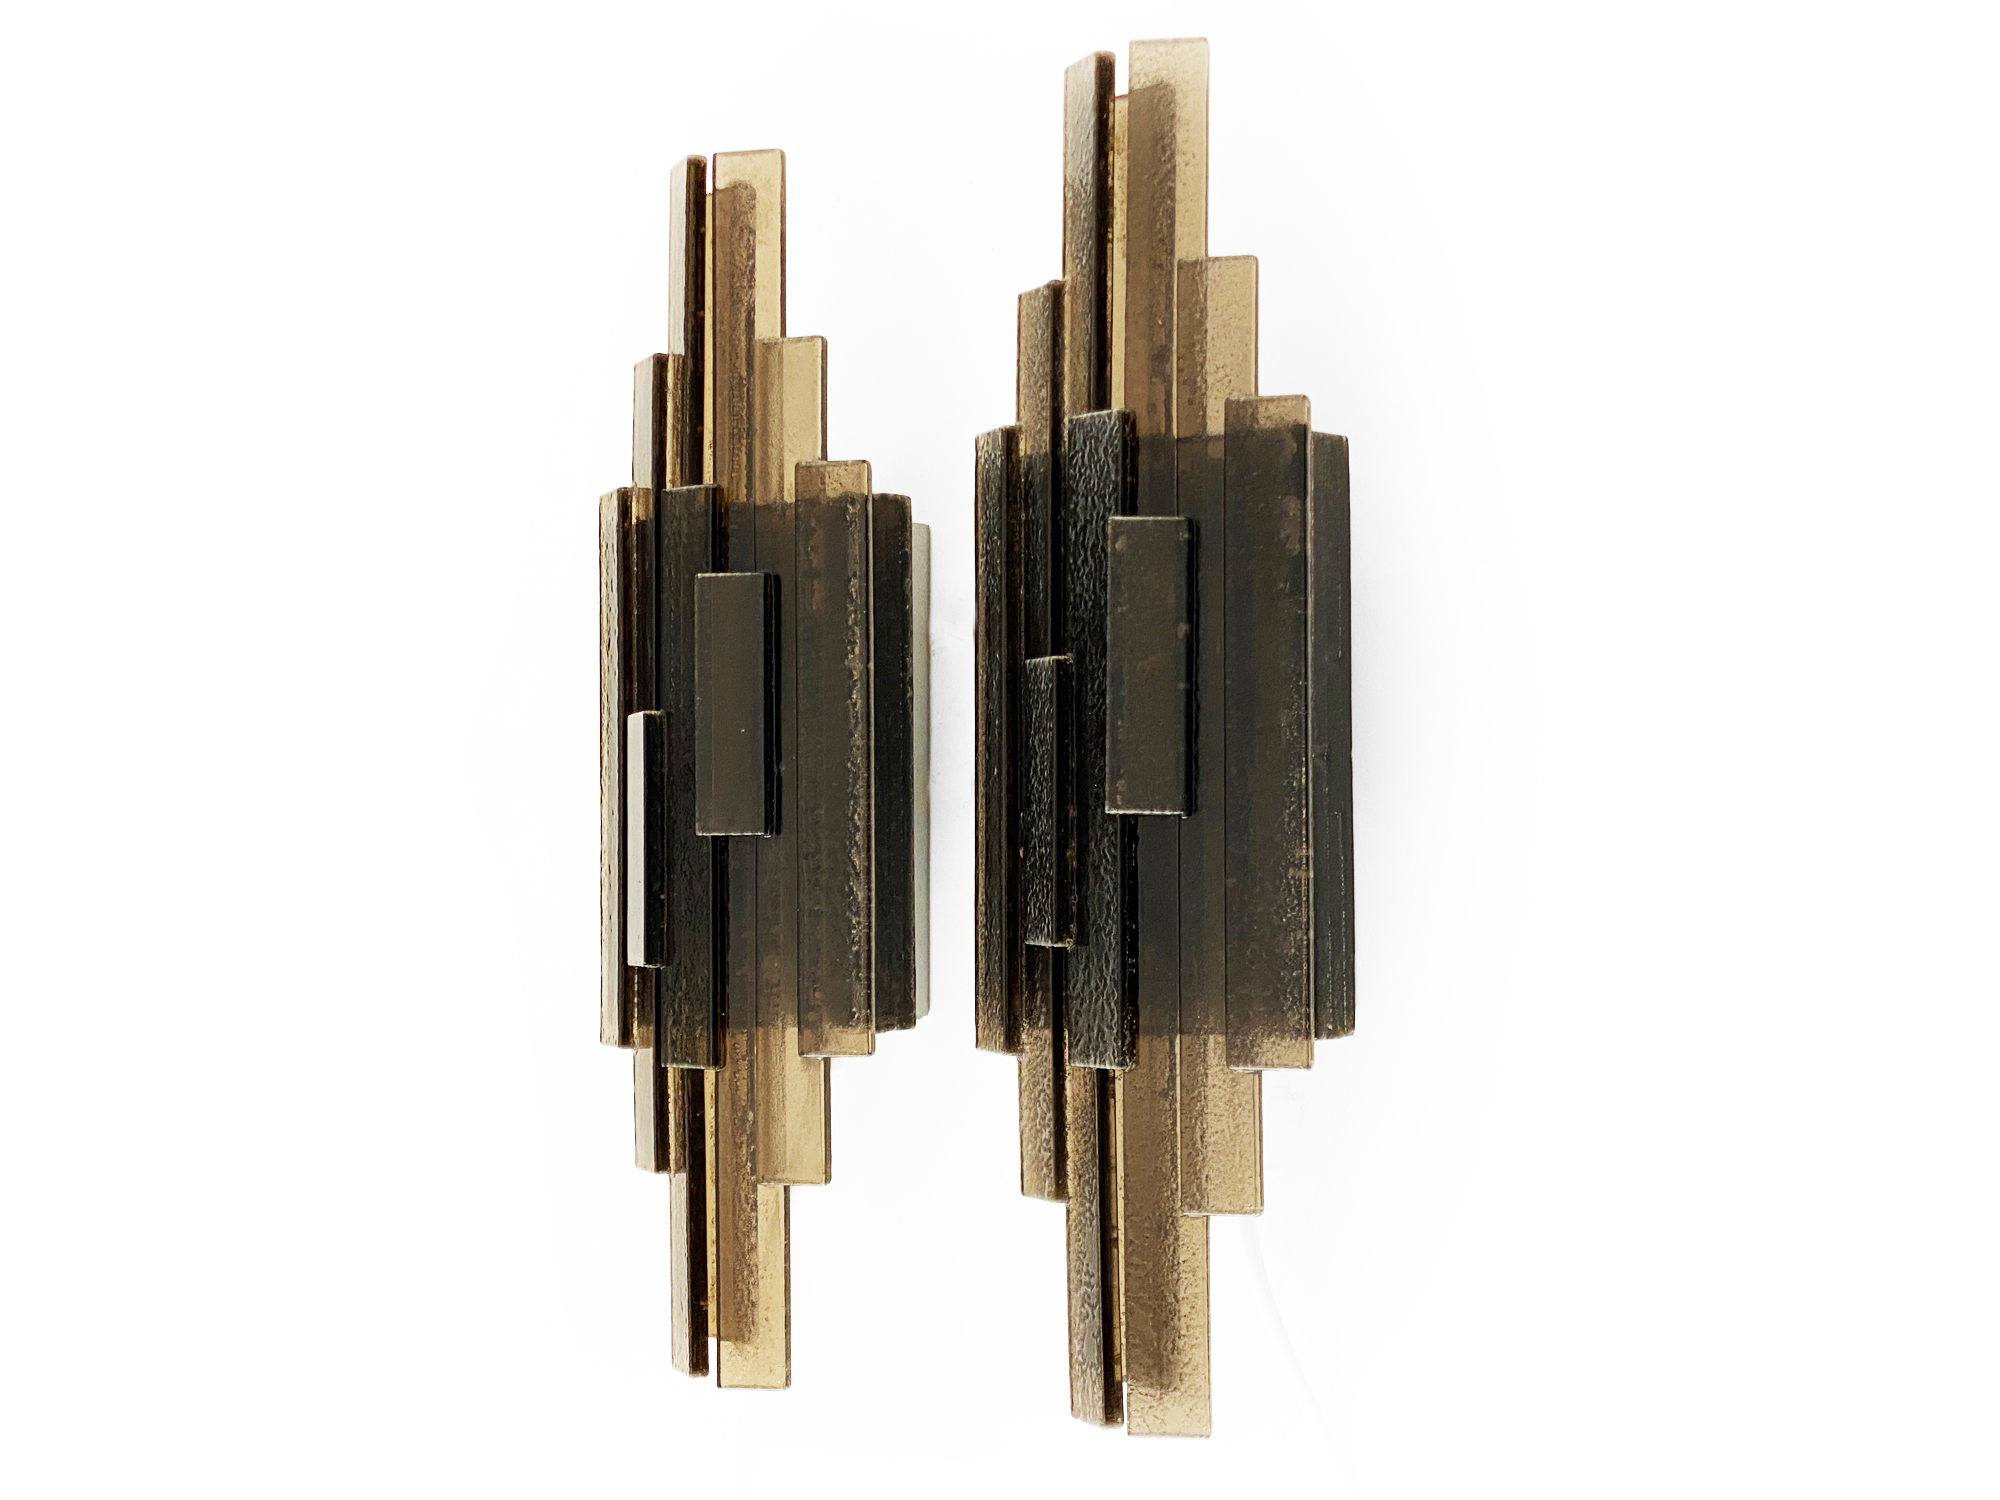 Pair of wall lights/sconces 1006 by Claus Bolby for CeBo industri. Denmark 1960s